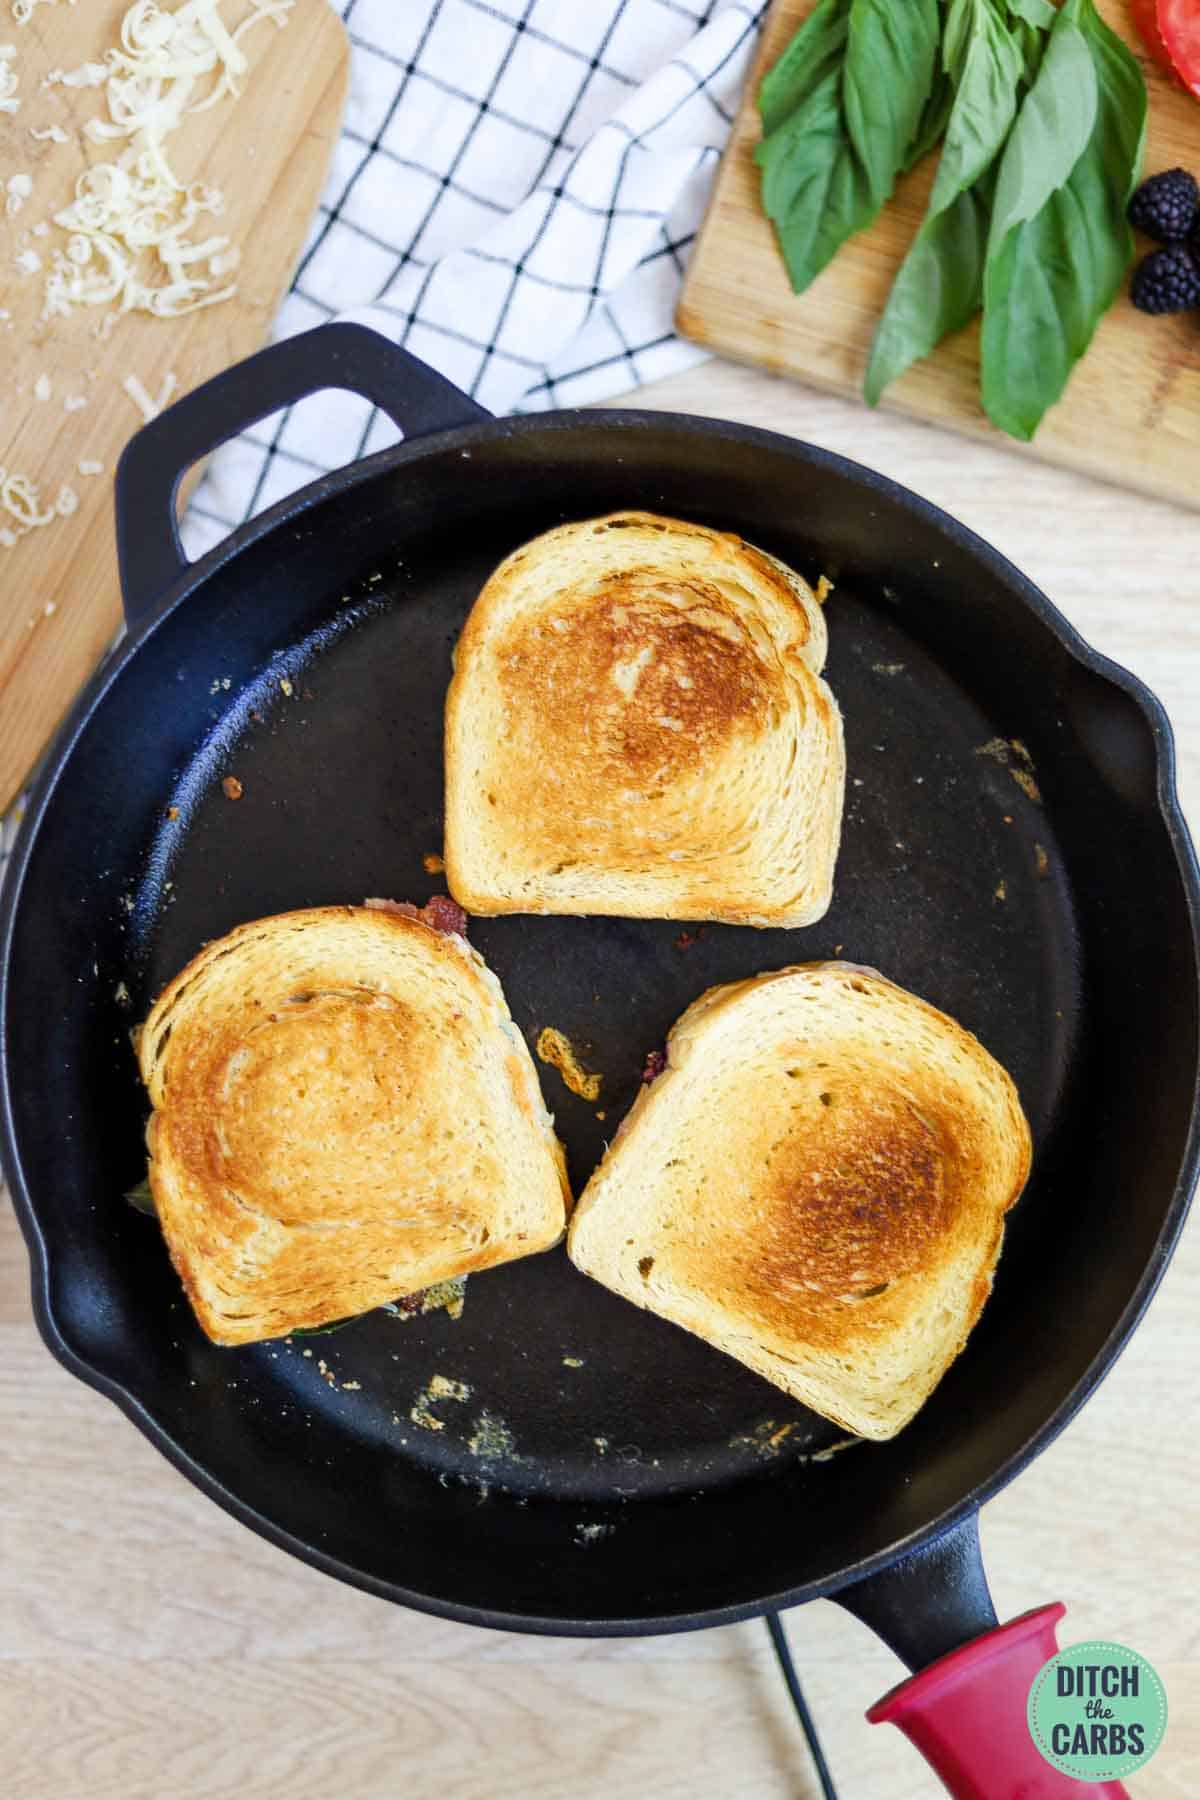 Three grilled cheese sandwiches cooking in a cast iron skillet.